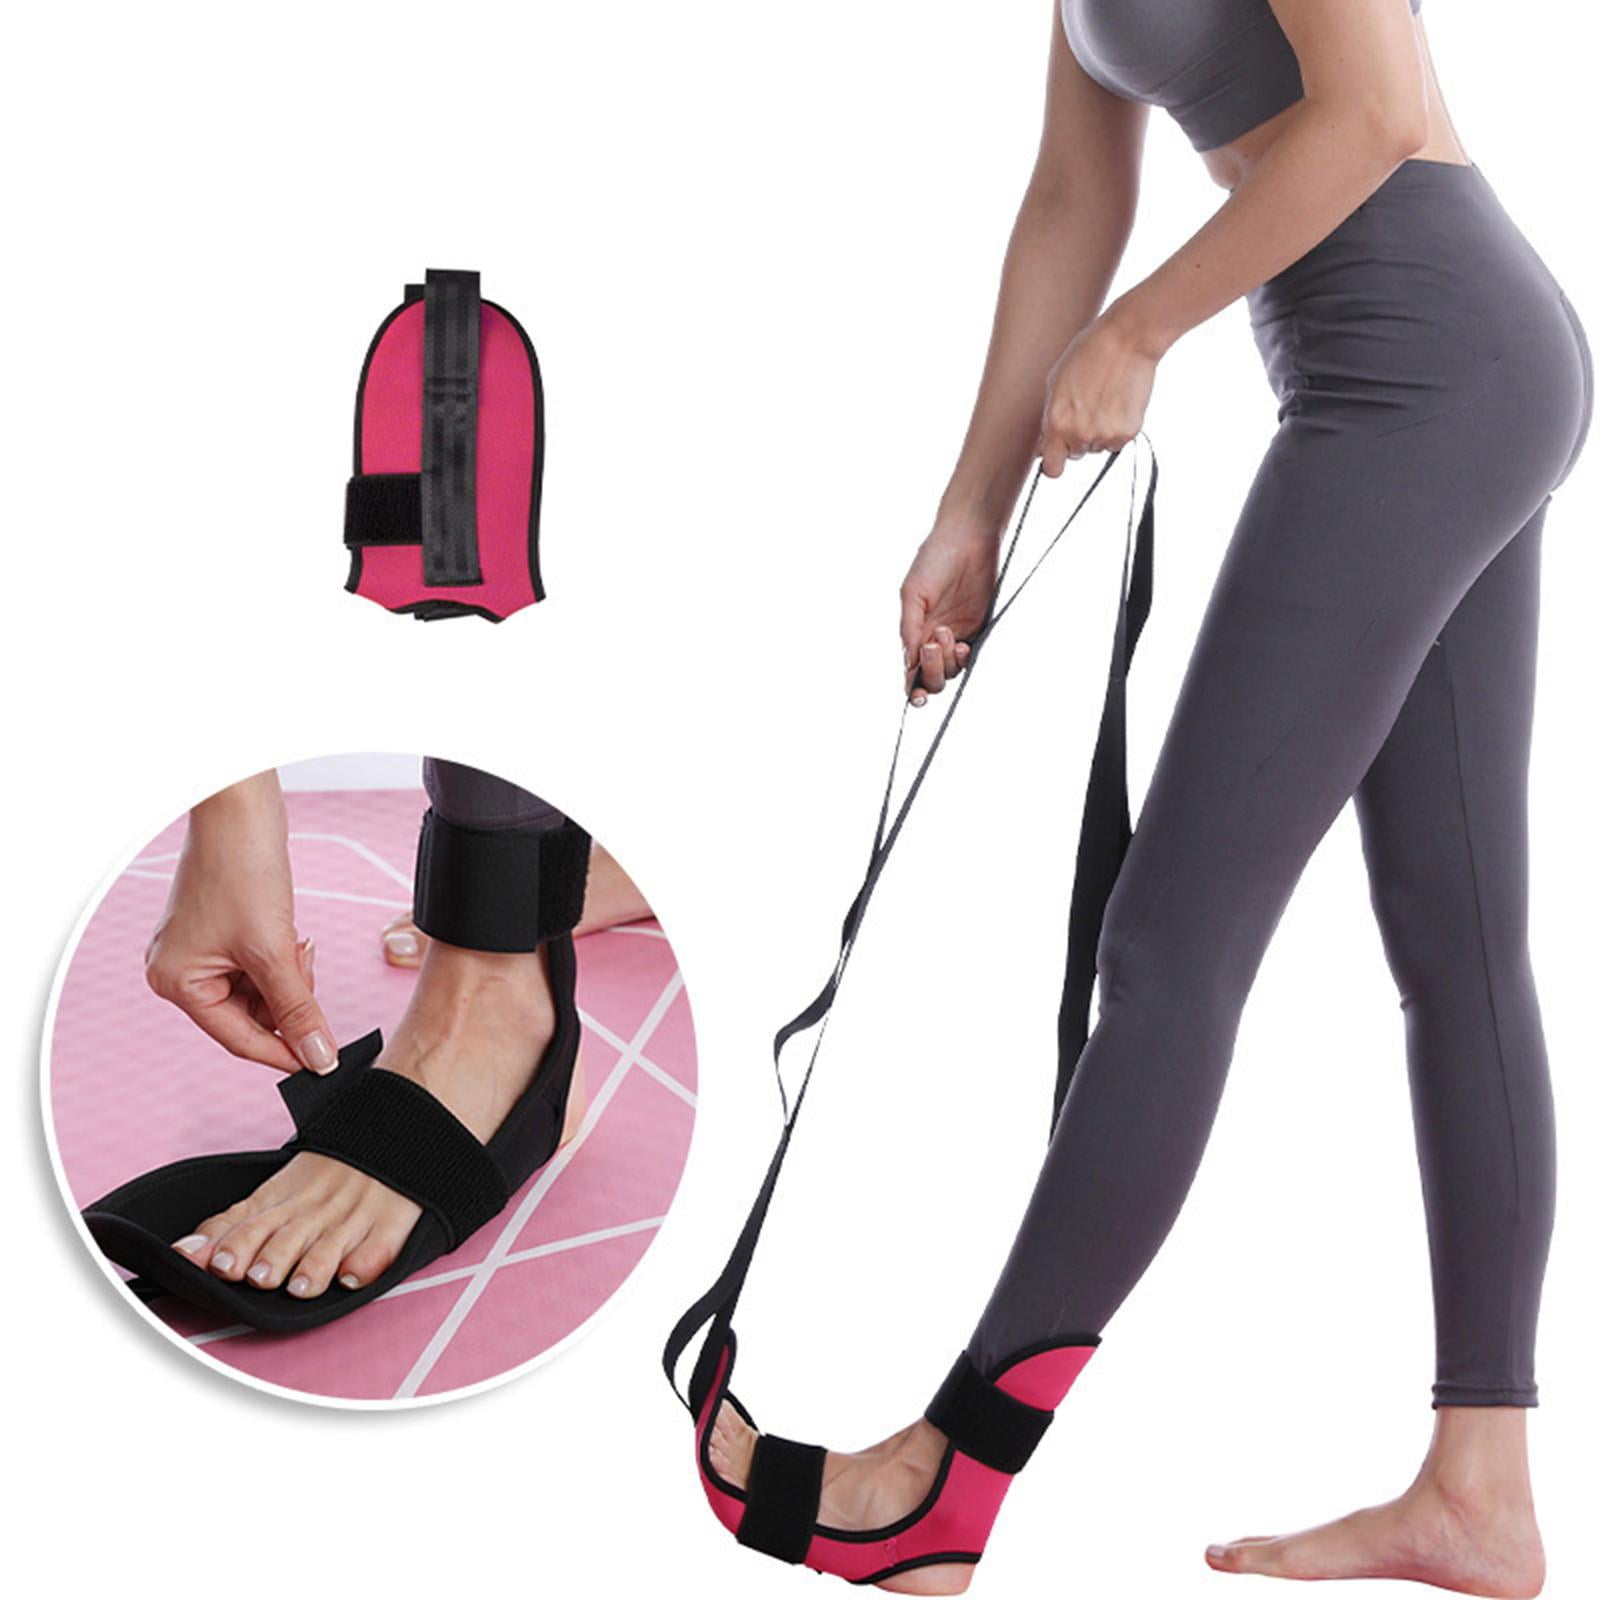 Stretching Strap and Foot Stretcher for Plantar Fasciitis